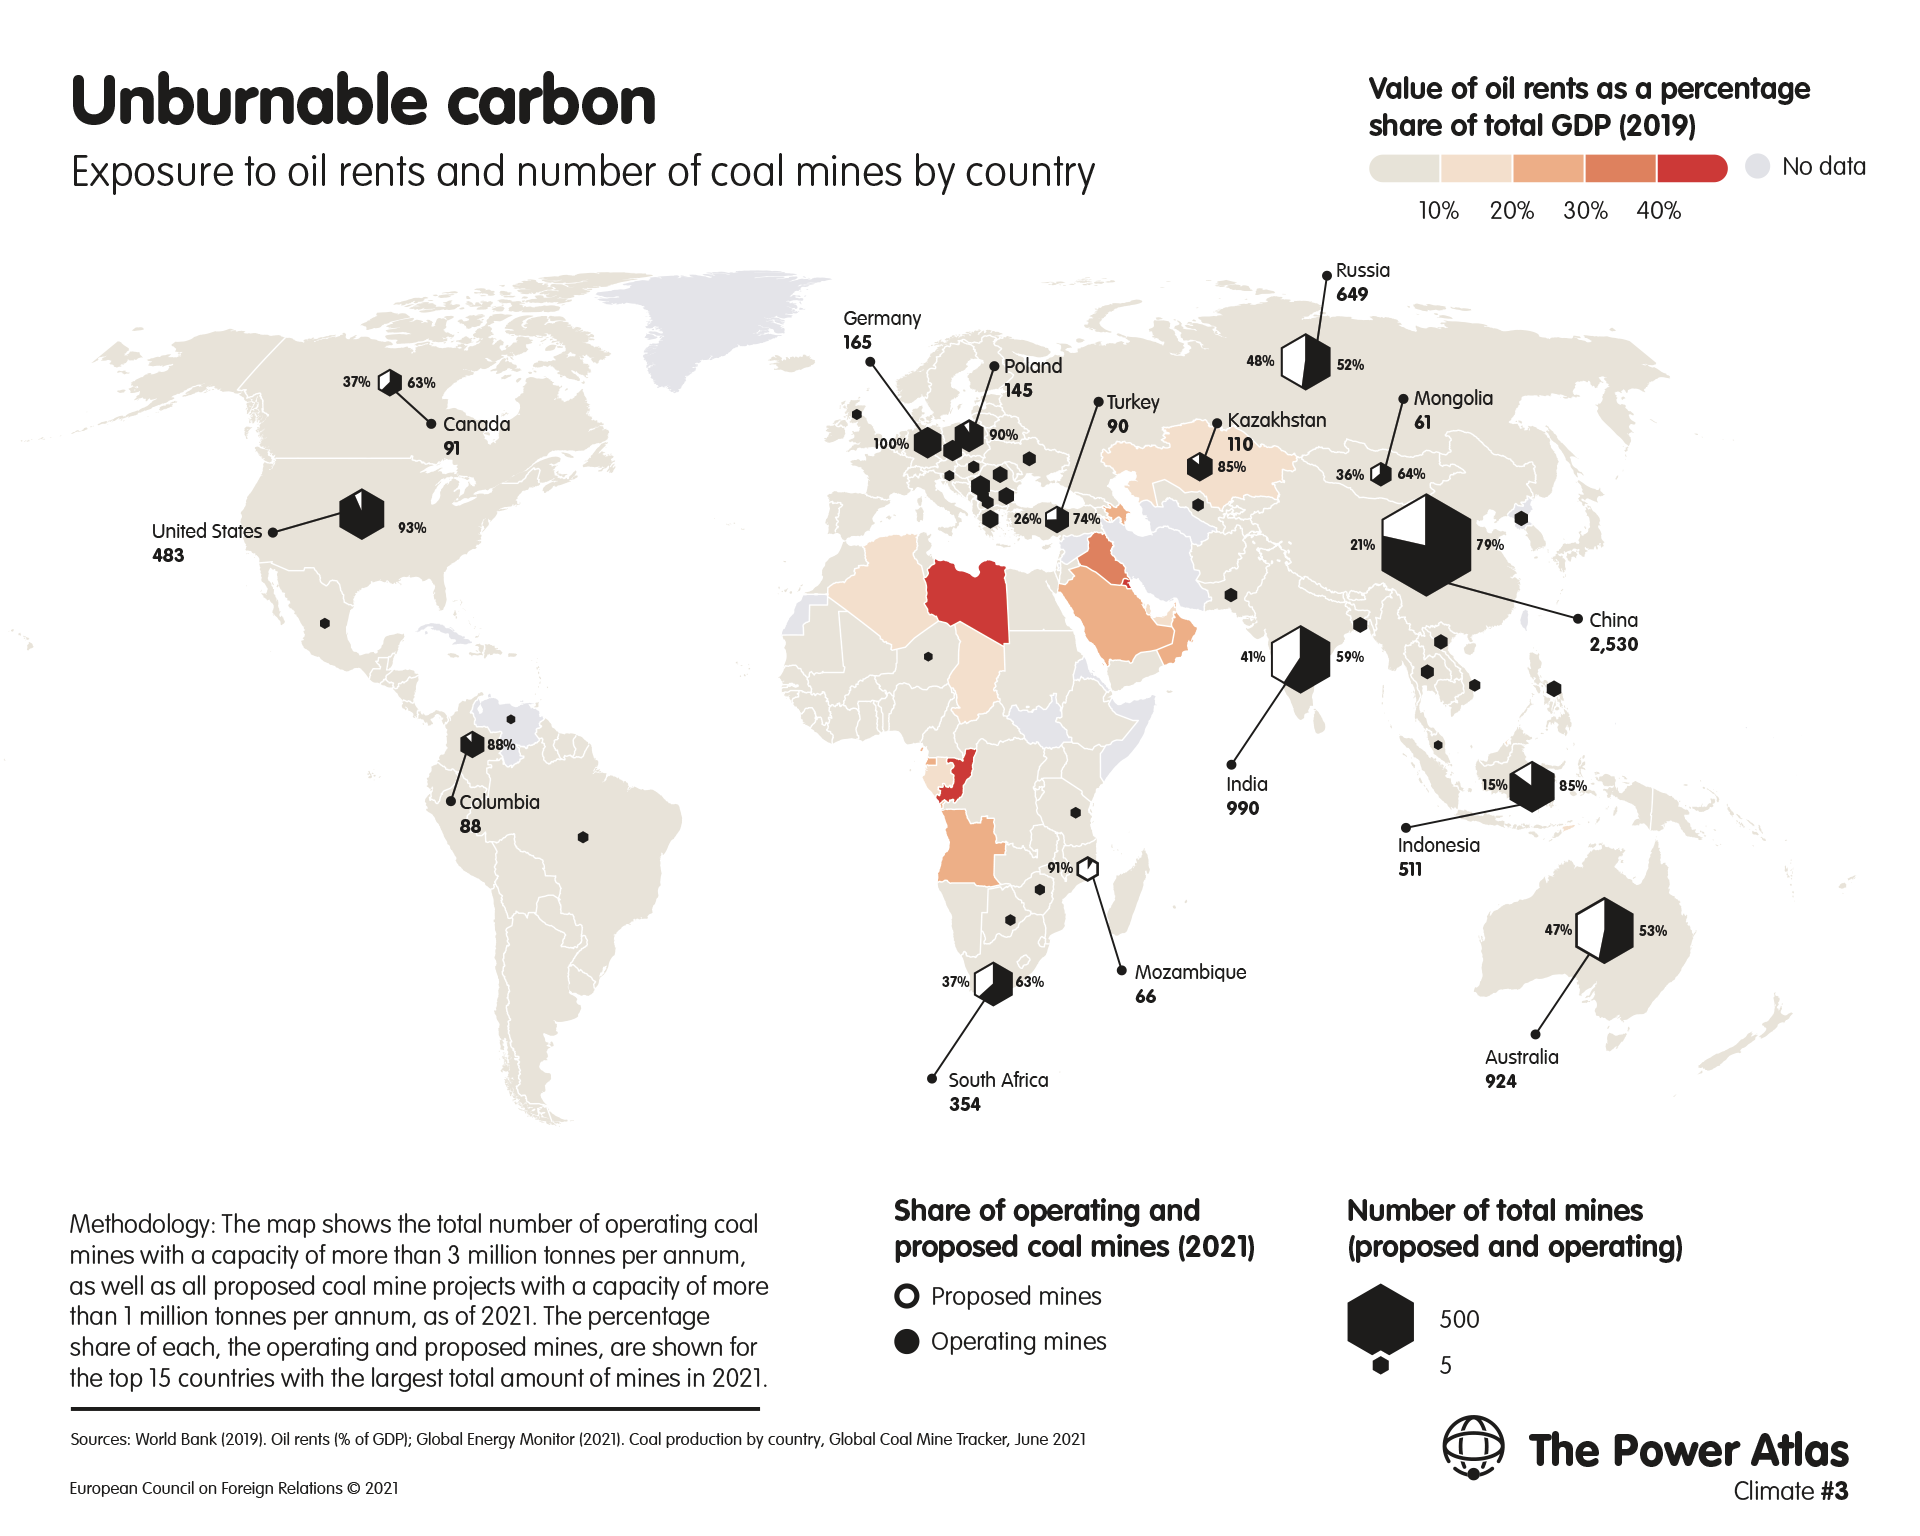 Unburnable carbon: Exposure to oil rents and number of coal mines by country
